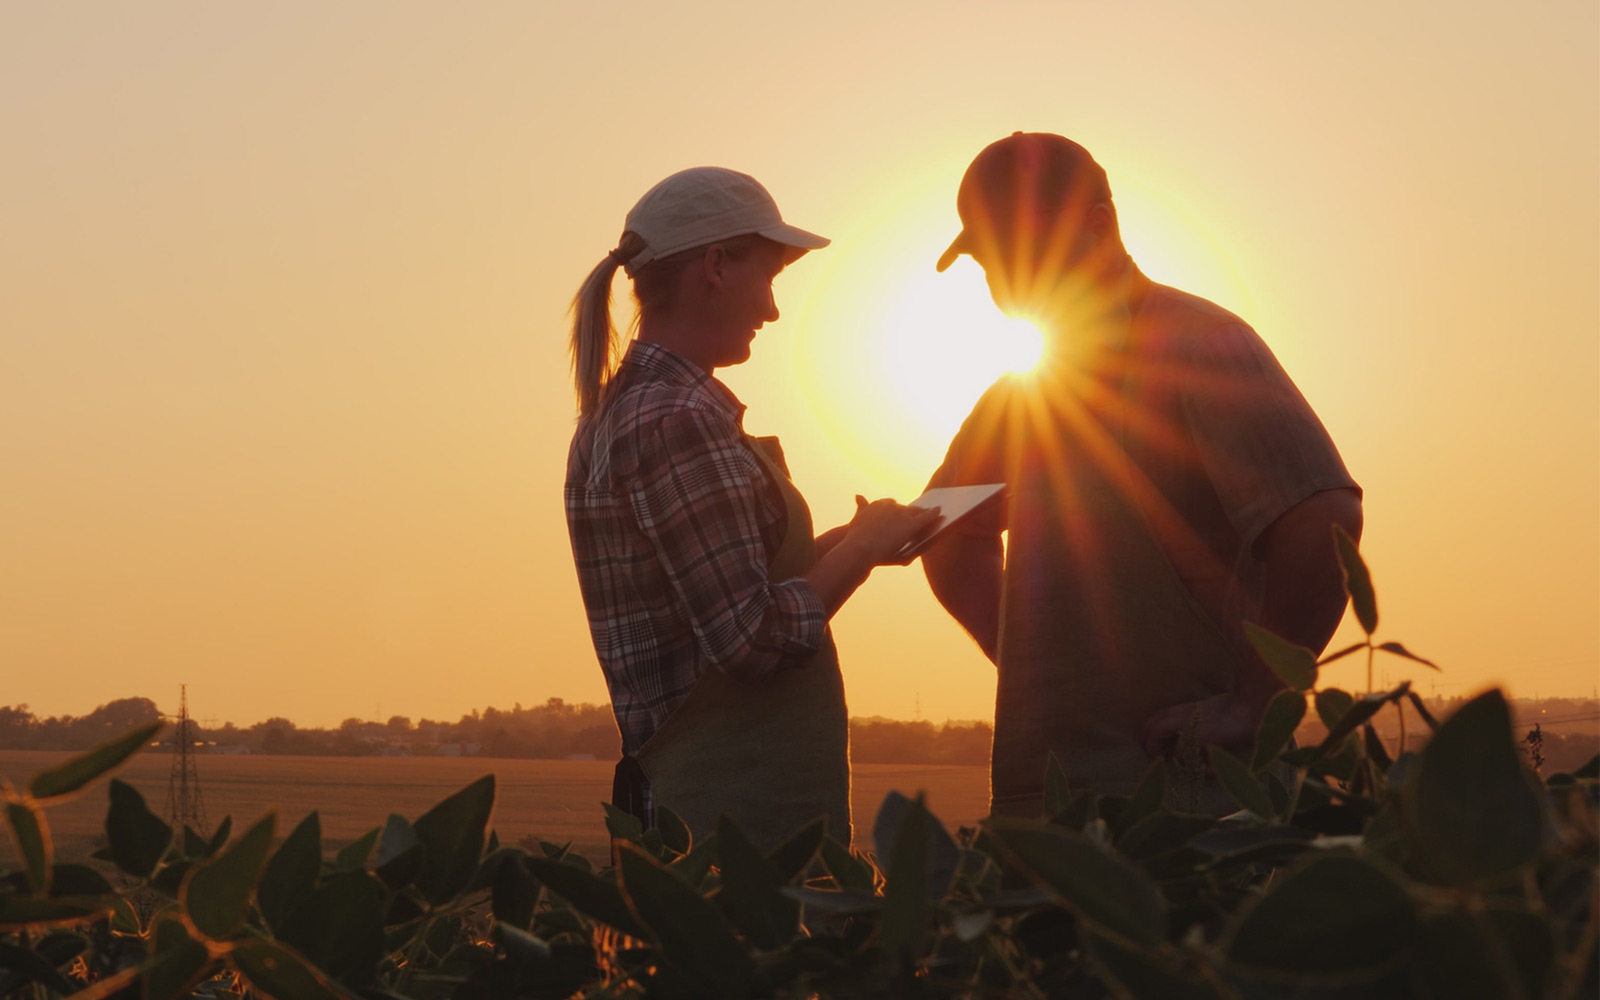 Farmers man and woman communicate in the field at sunset accompanied by a tablet